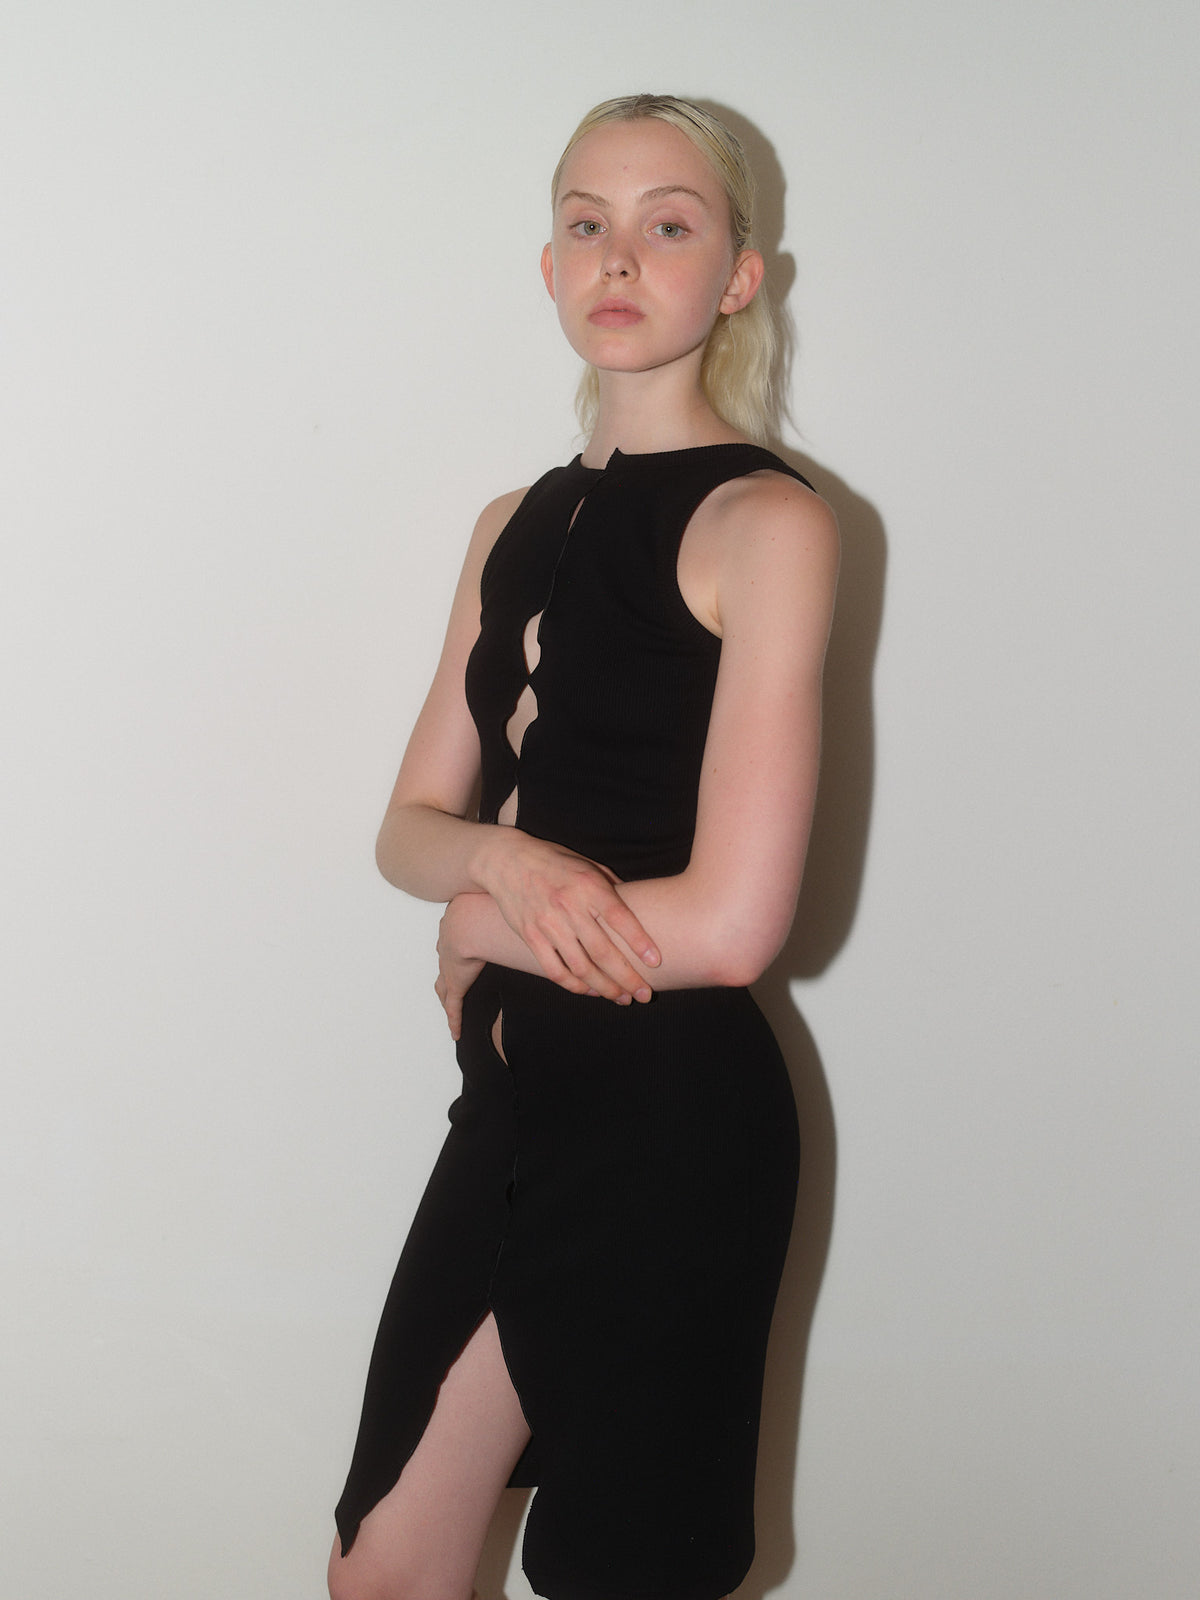 Draped Cotton Jersey Dress designed by Christina Seewald. Sustainable, designed and made in Europe.